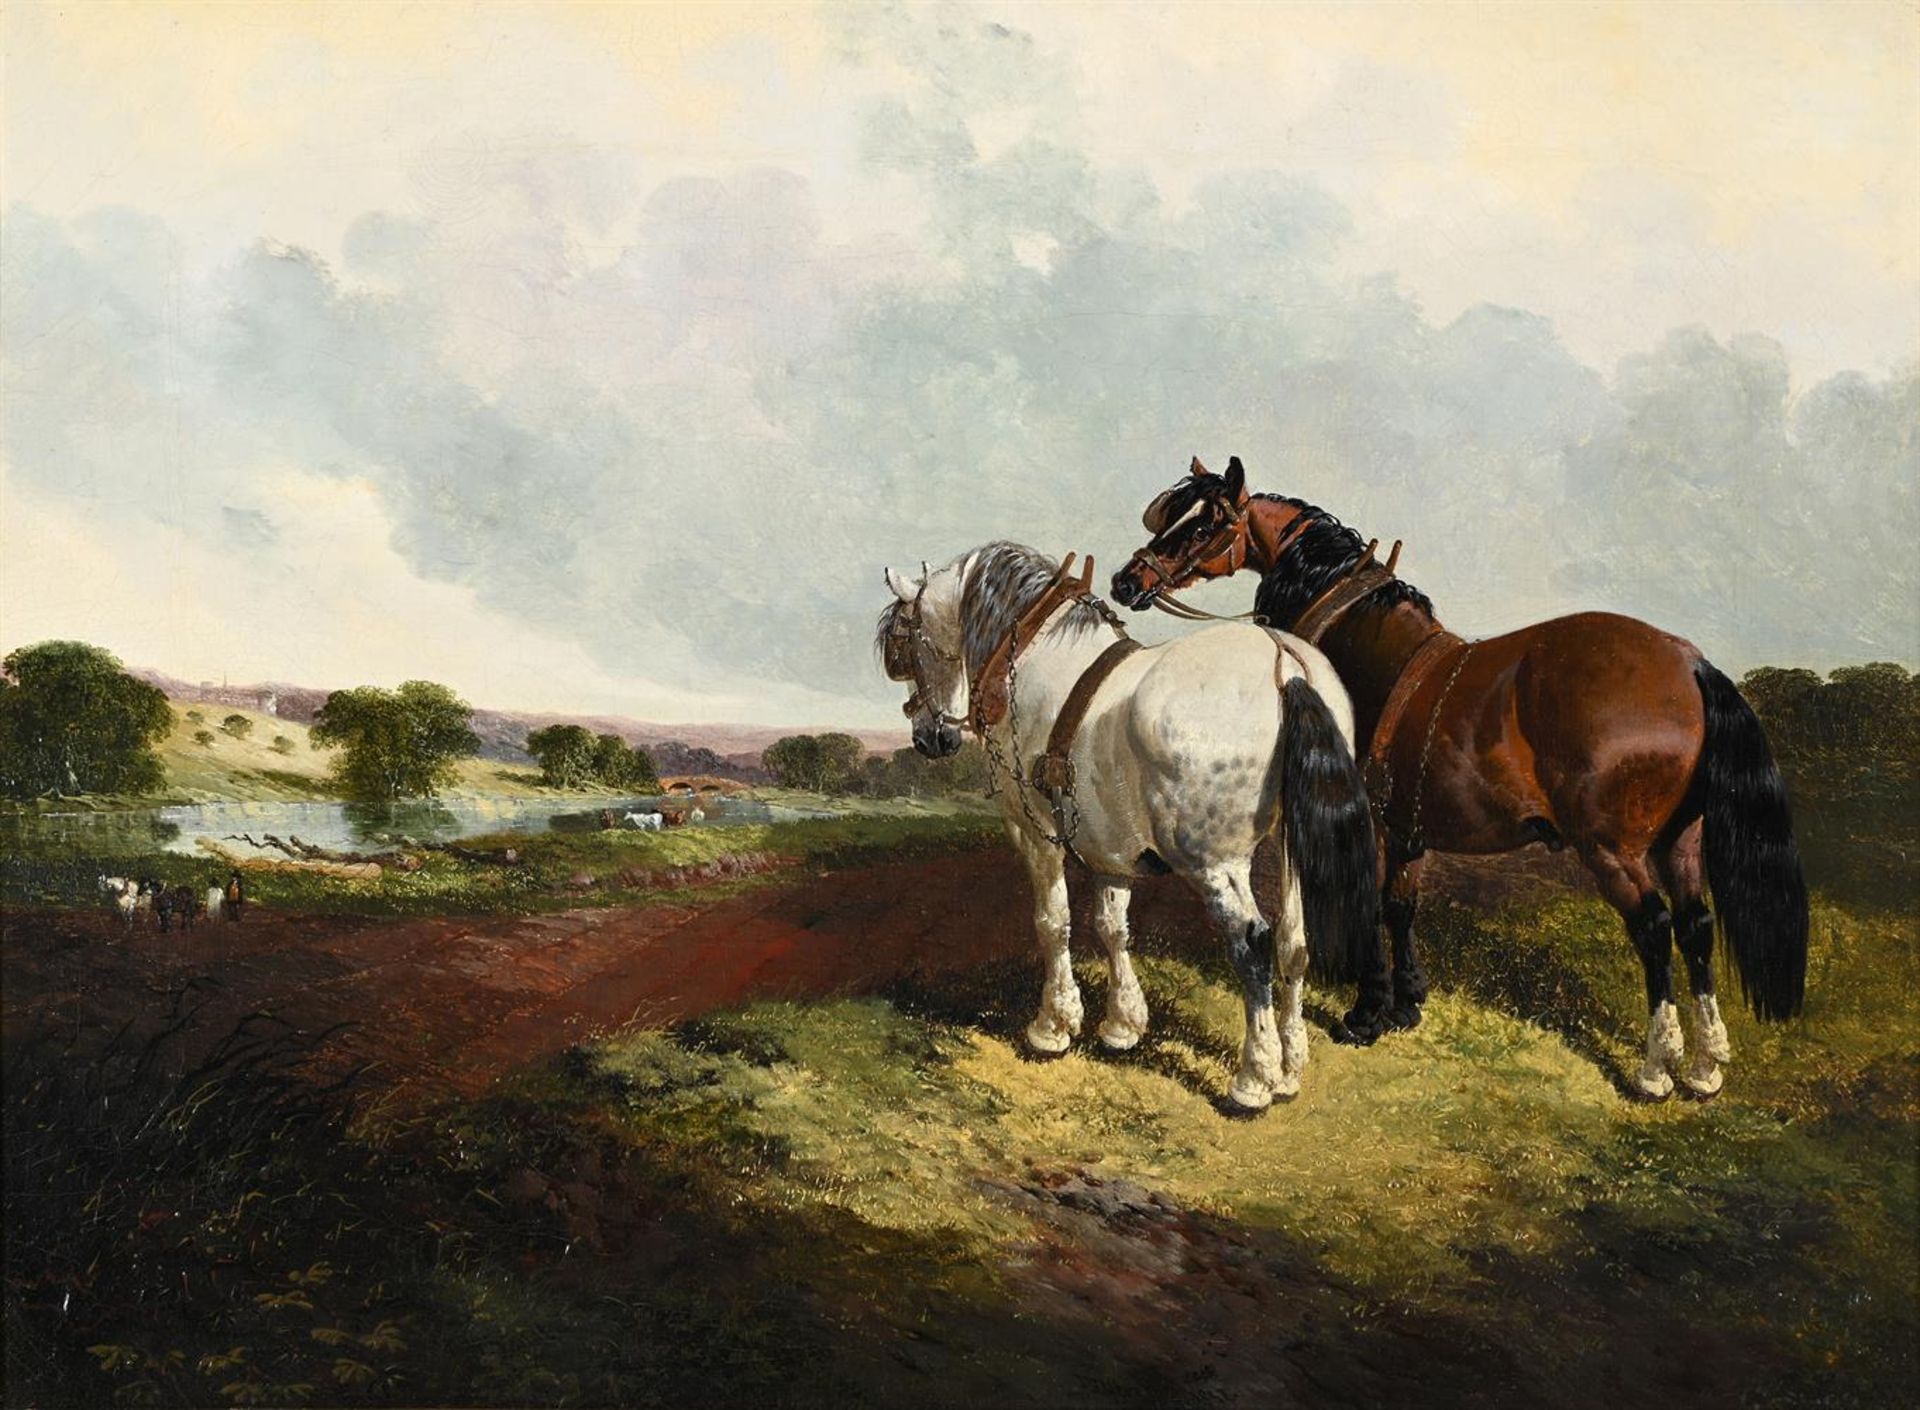 JOHN FREDERICK HERRING JUNIOR (BRITISH 1815-1907), TWO PLOUGH HORSES AT THE EDGE OF A FIELD - Image 2 of 3